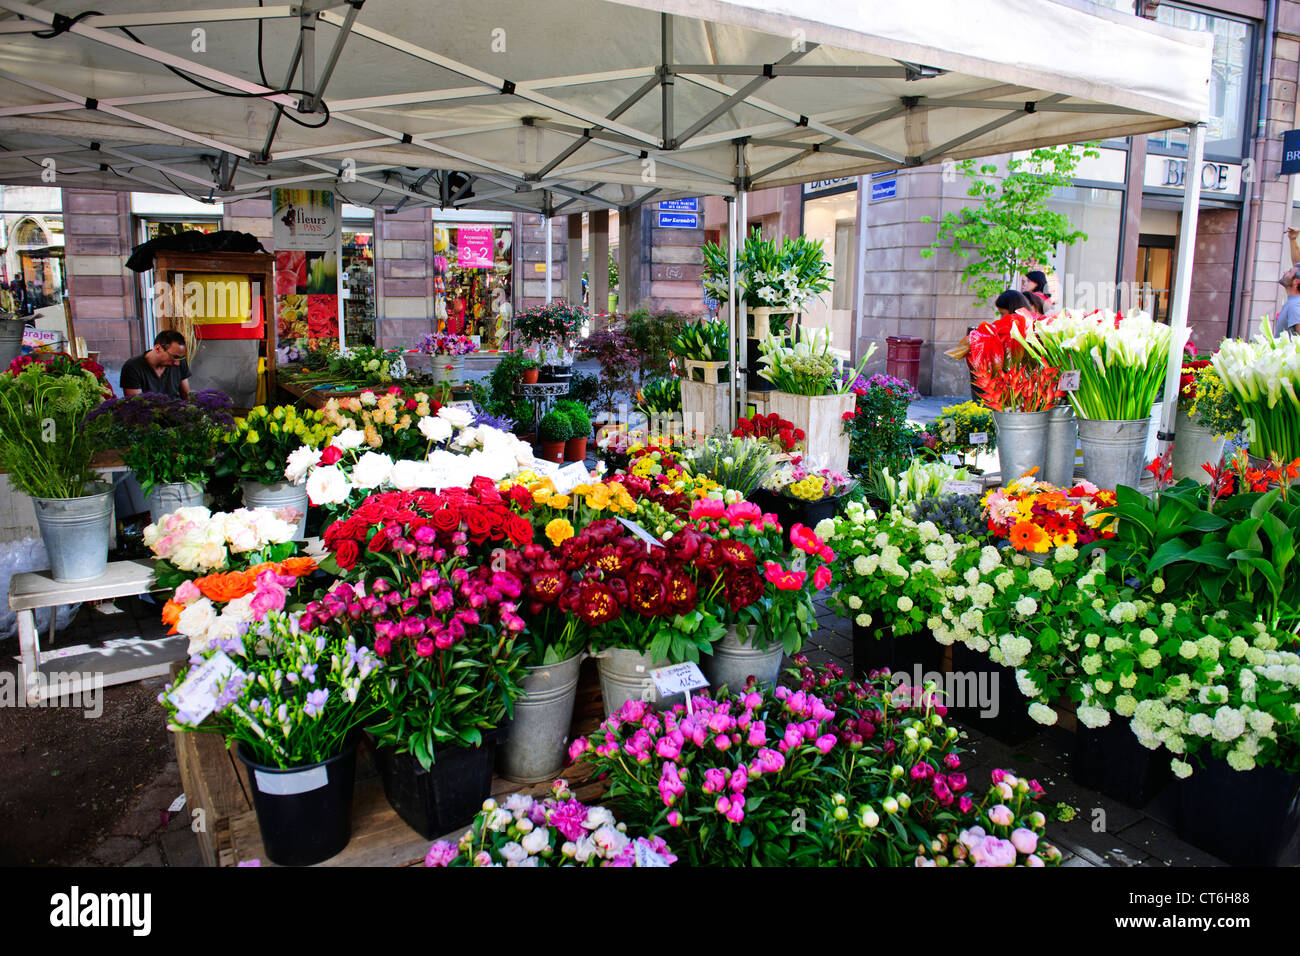 Flower Stall off Place du Marche Neuf,Strasbourg,France Stock Photo